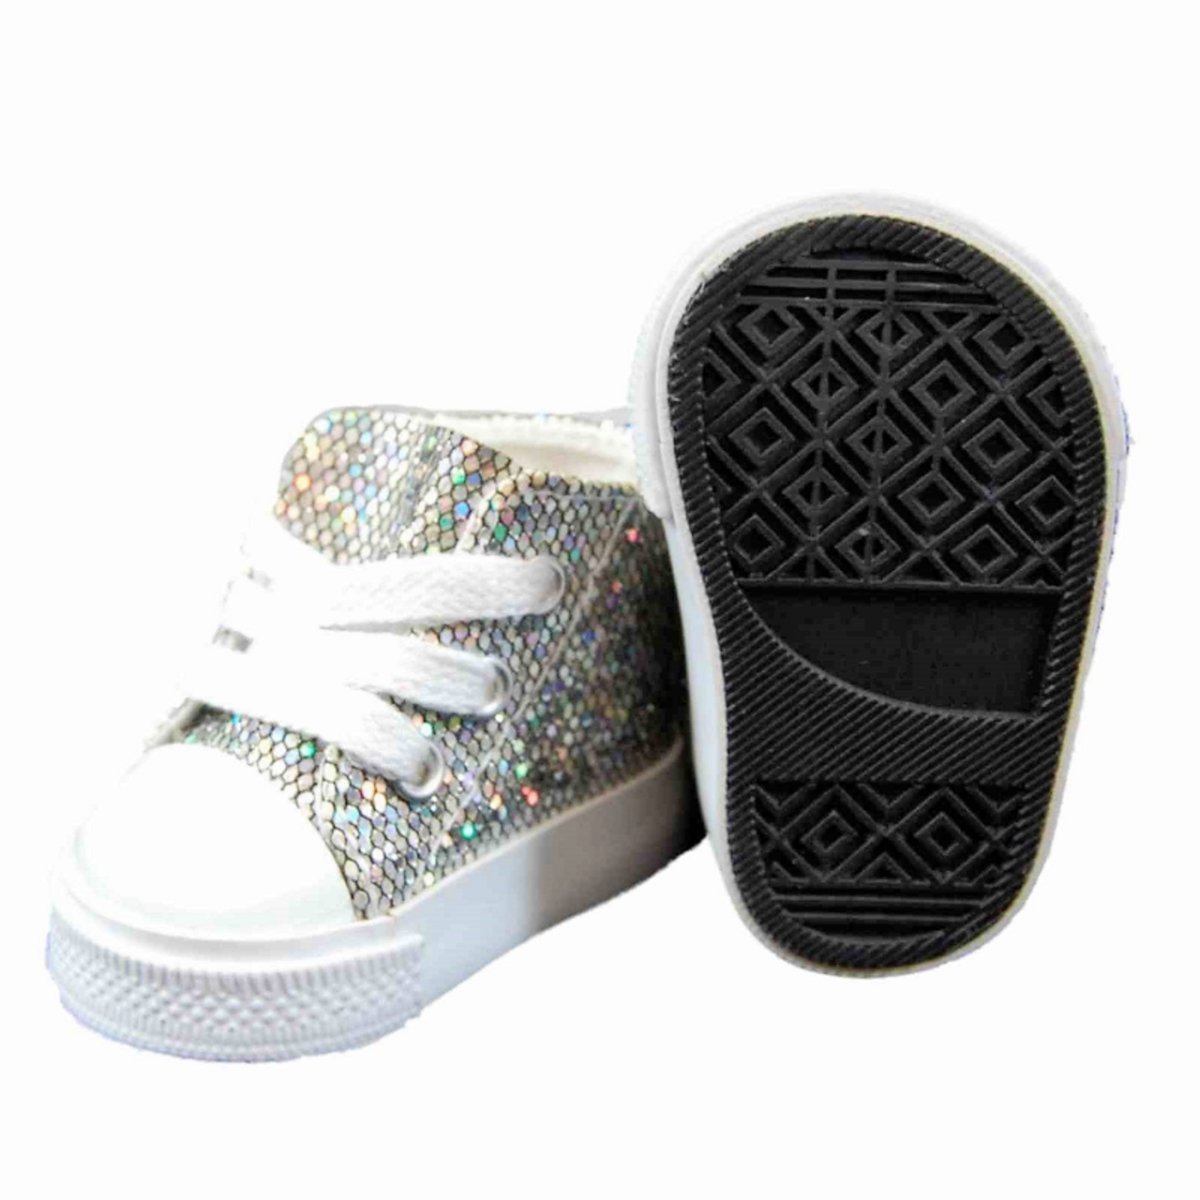 Queen's Treasures Sparkly Silver Sneakers and Shoe Box for 18" Dolls - Simon's Collectibles